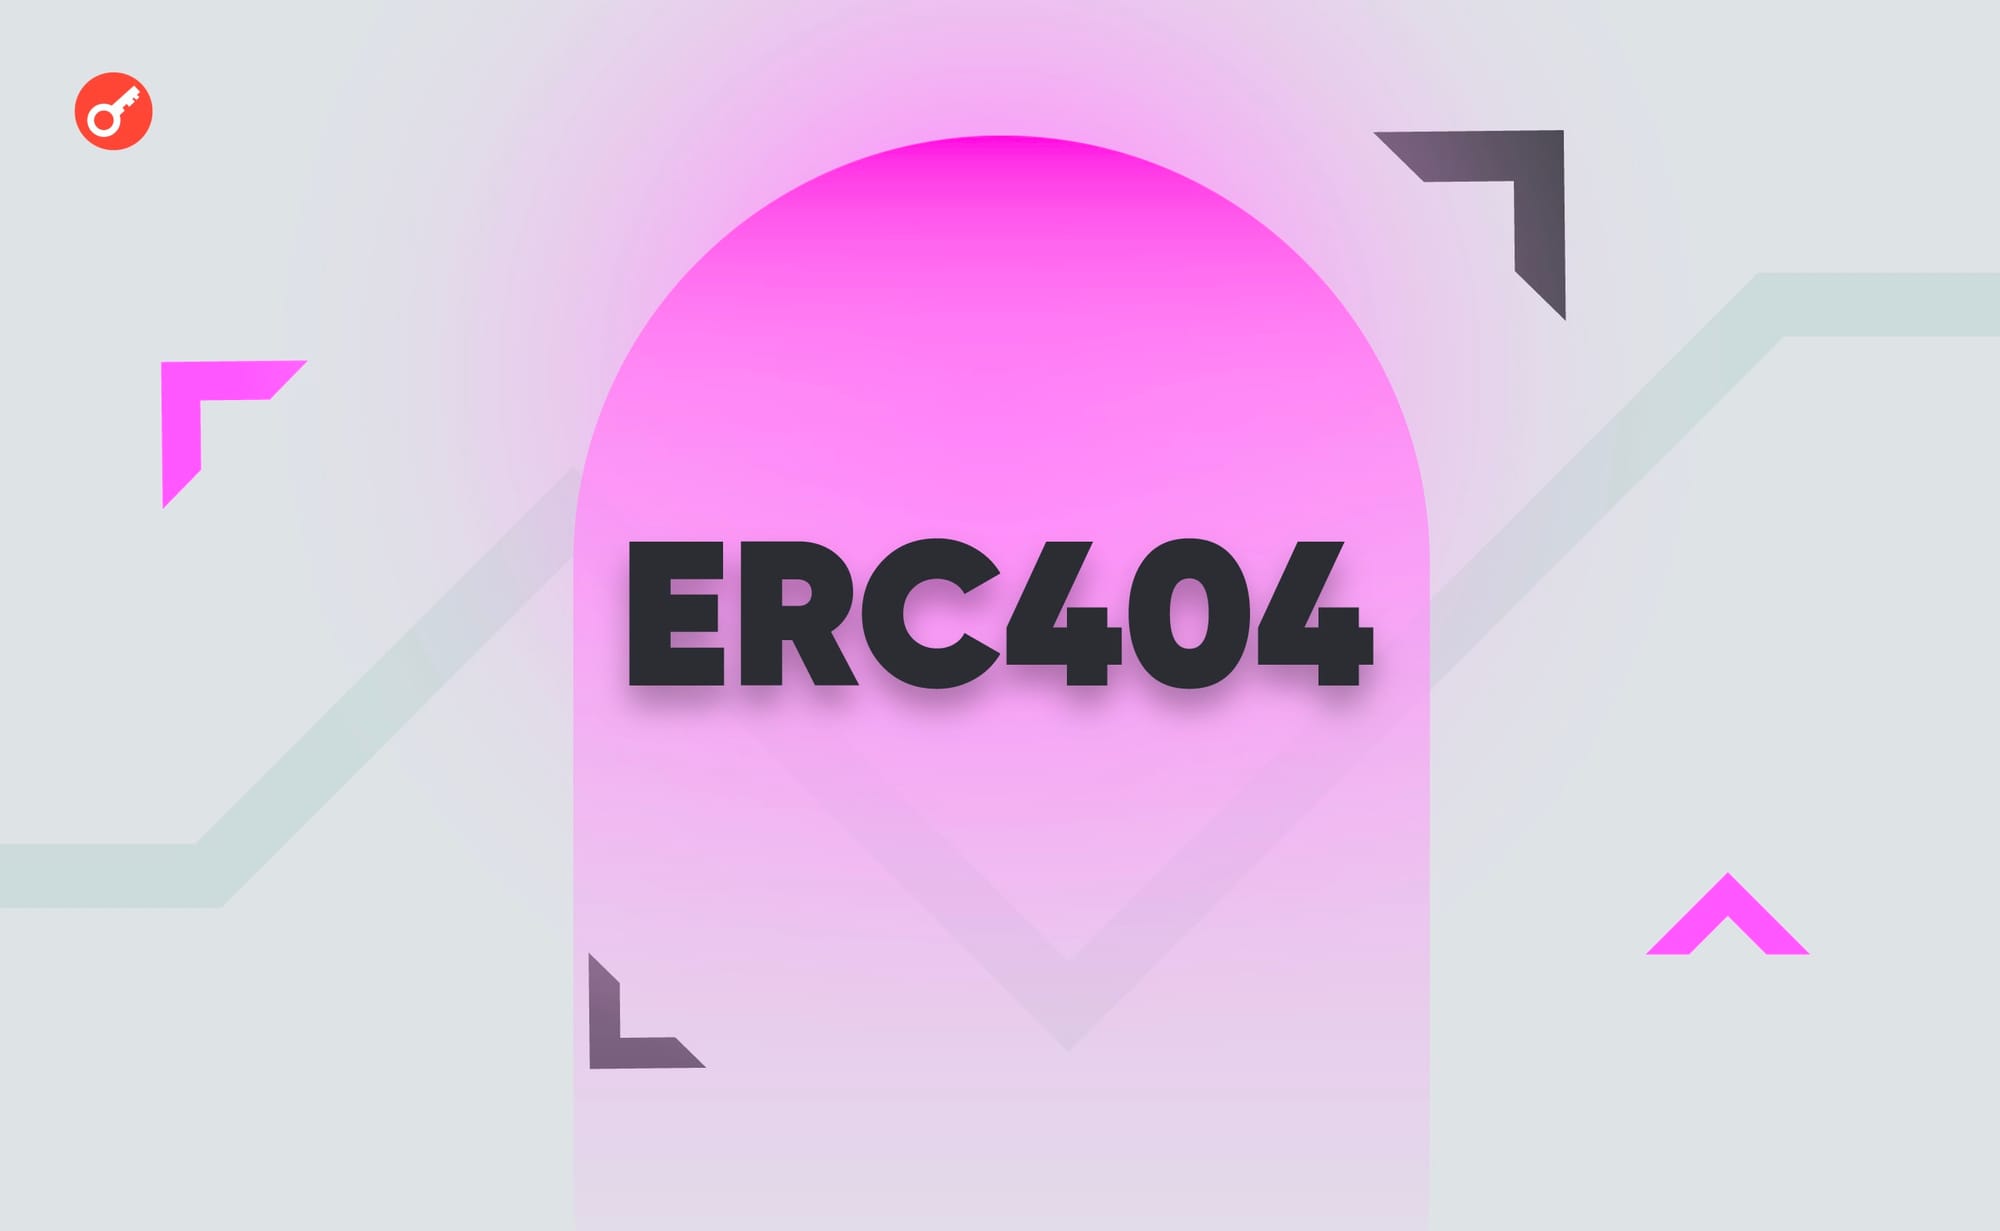 The developers have presented an alternative to the ERC-404 with a low commission